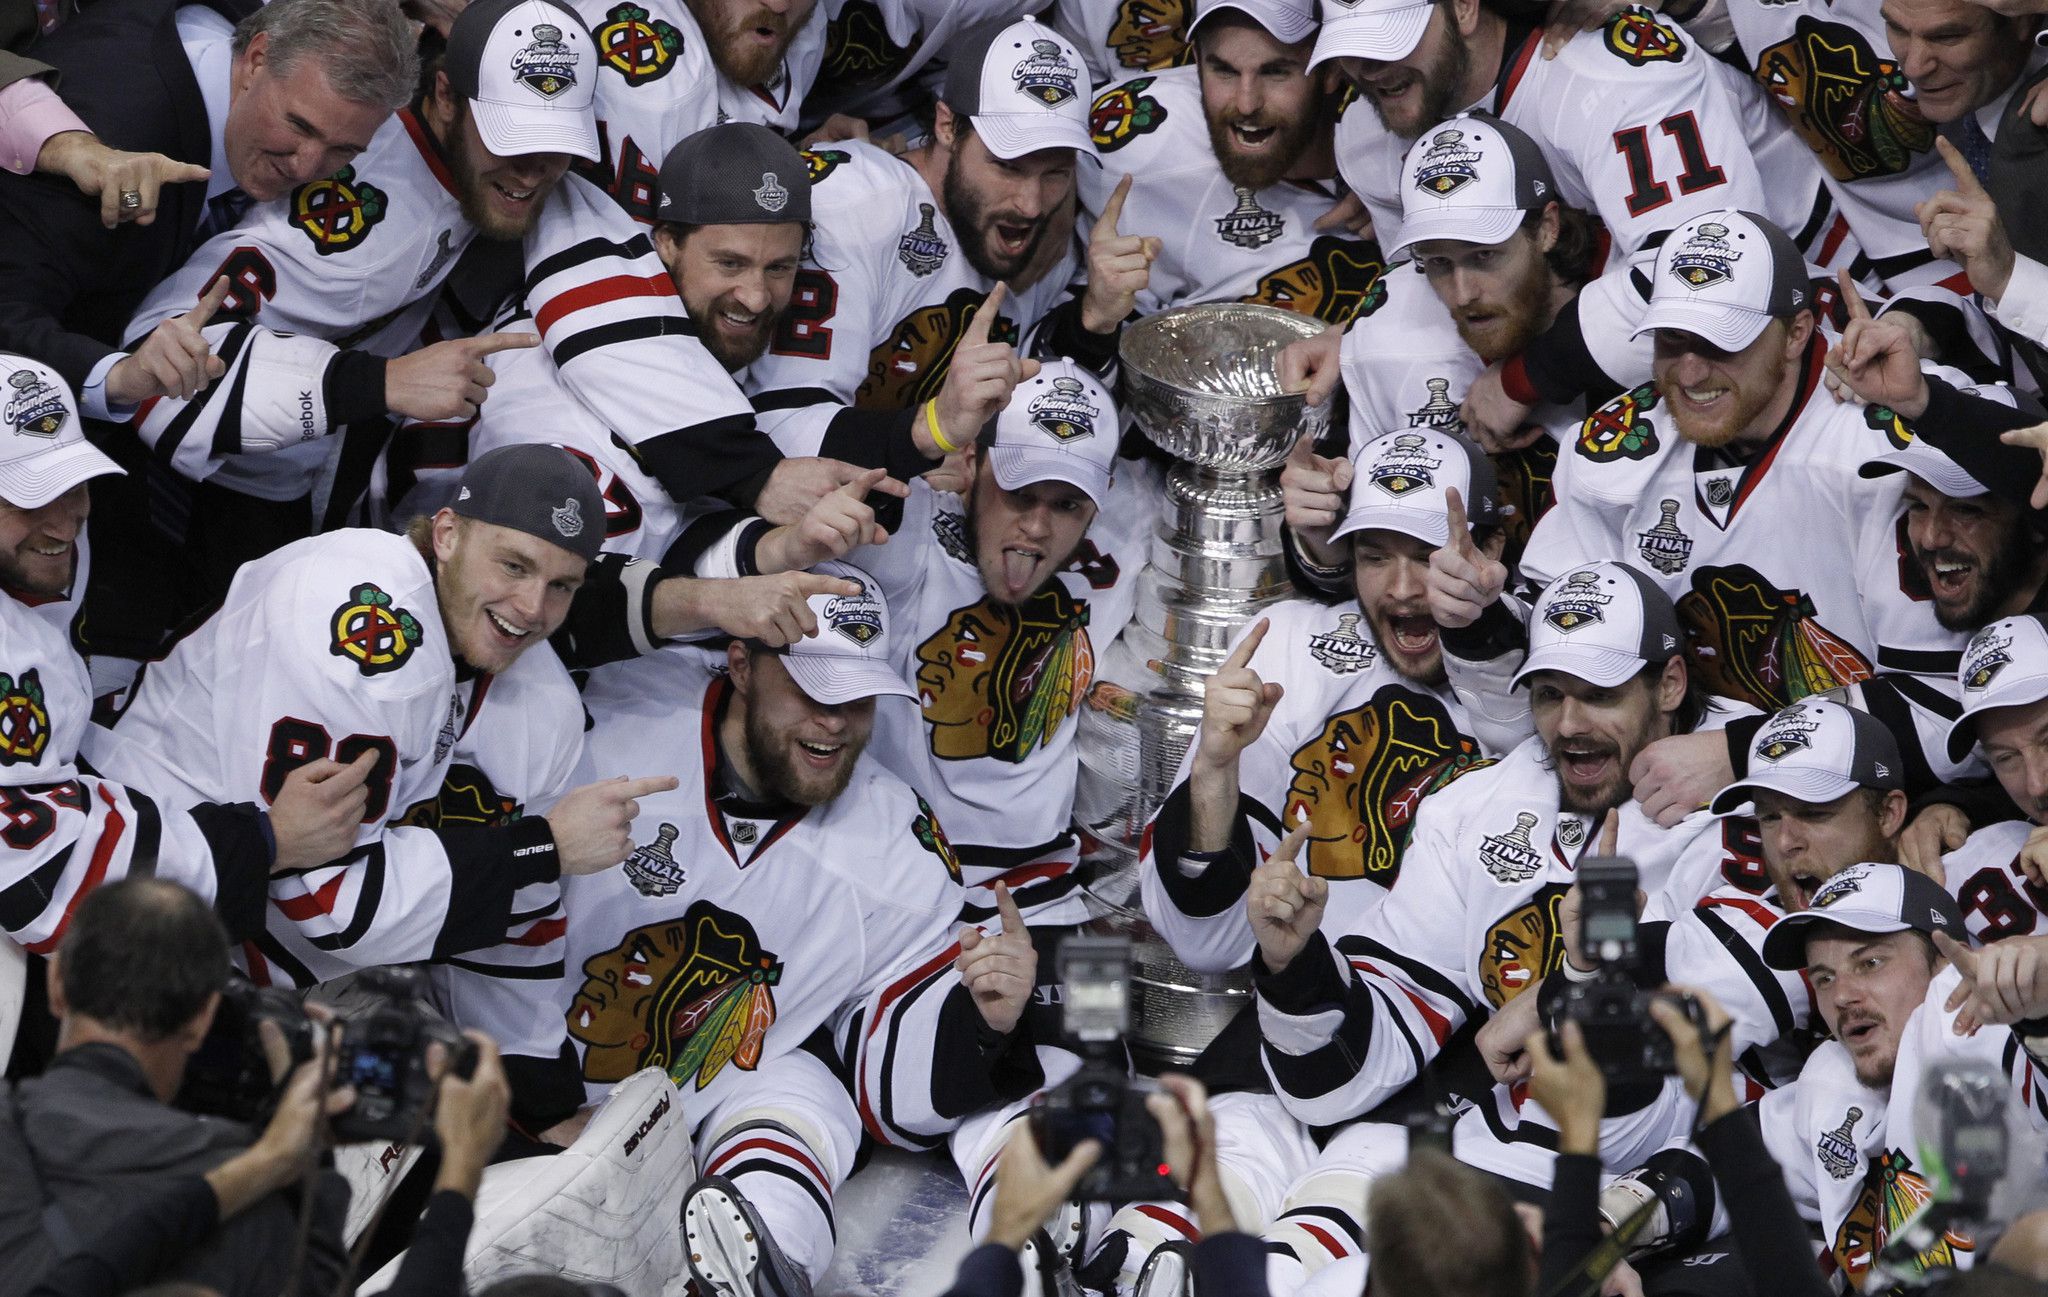 Marian Hossa, center, poses for photos with teammates Duncan Keith, left,  Brent Seabrook, second from left, Niklas Hjalmarsson, third from left,  Patrick Sharp, third from right, Patrick Kane, second from right, and  Jonathan Toews during a Chicago